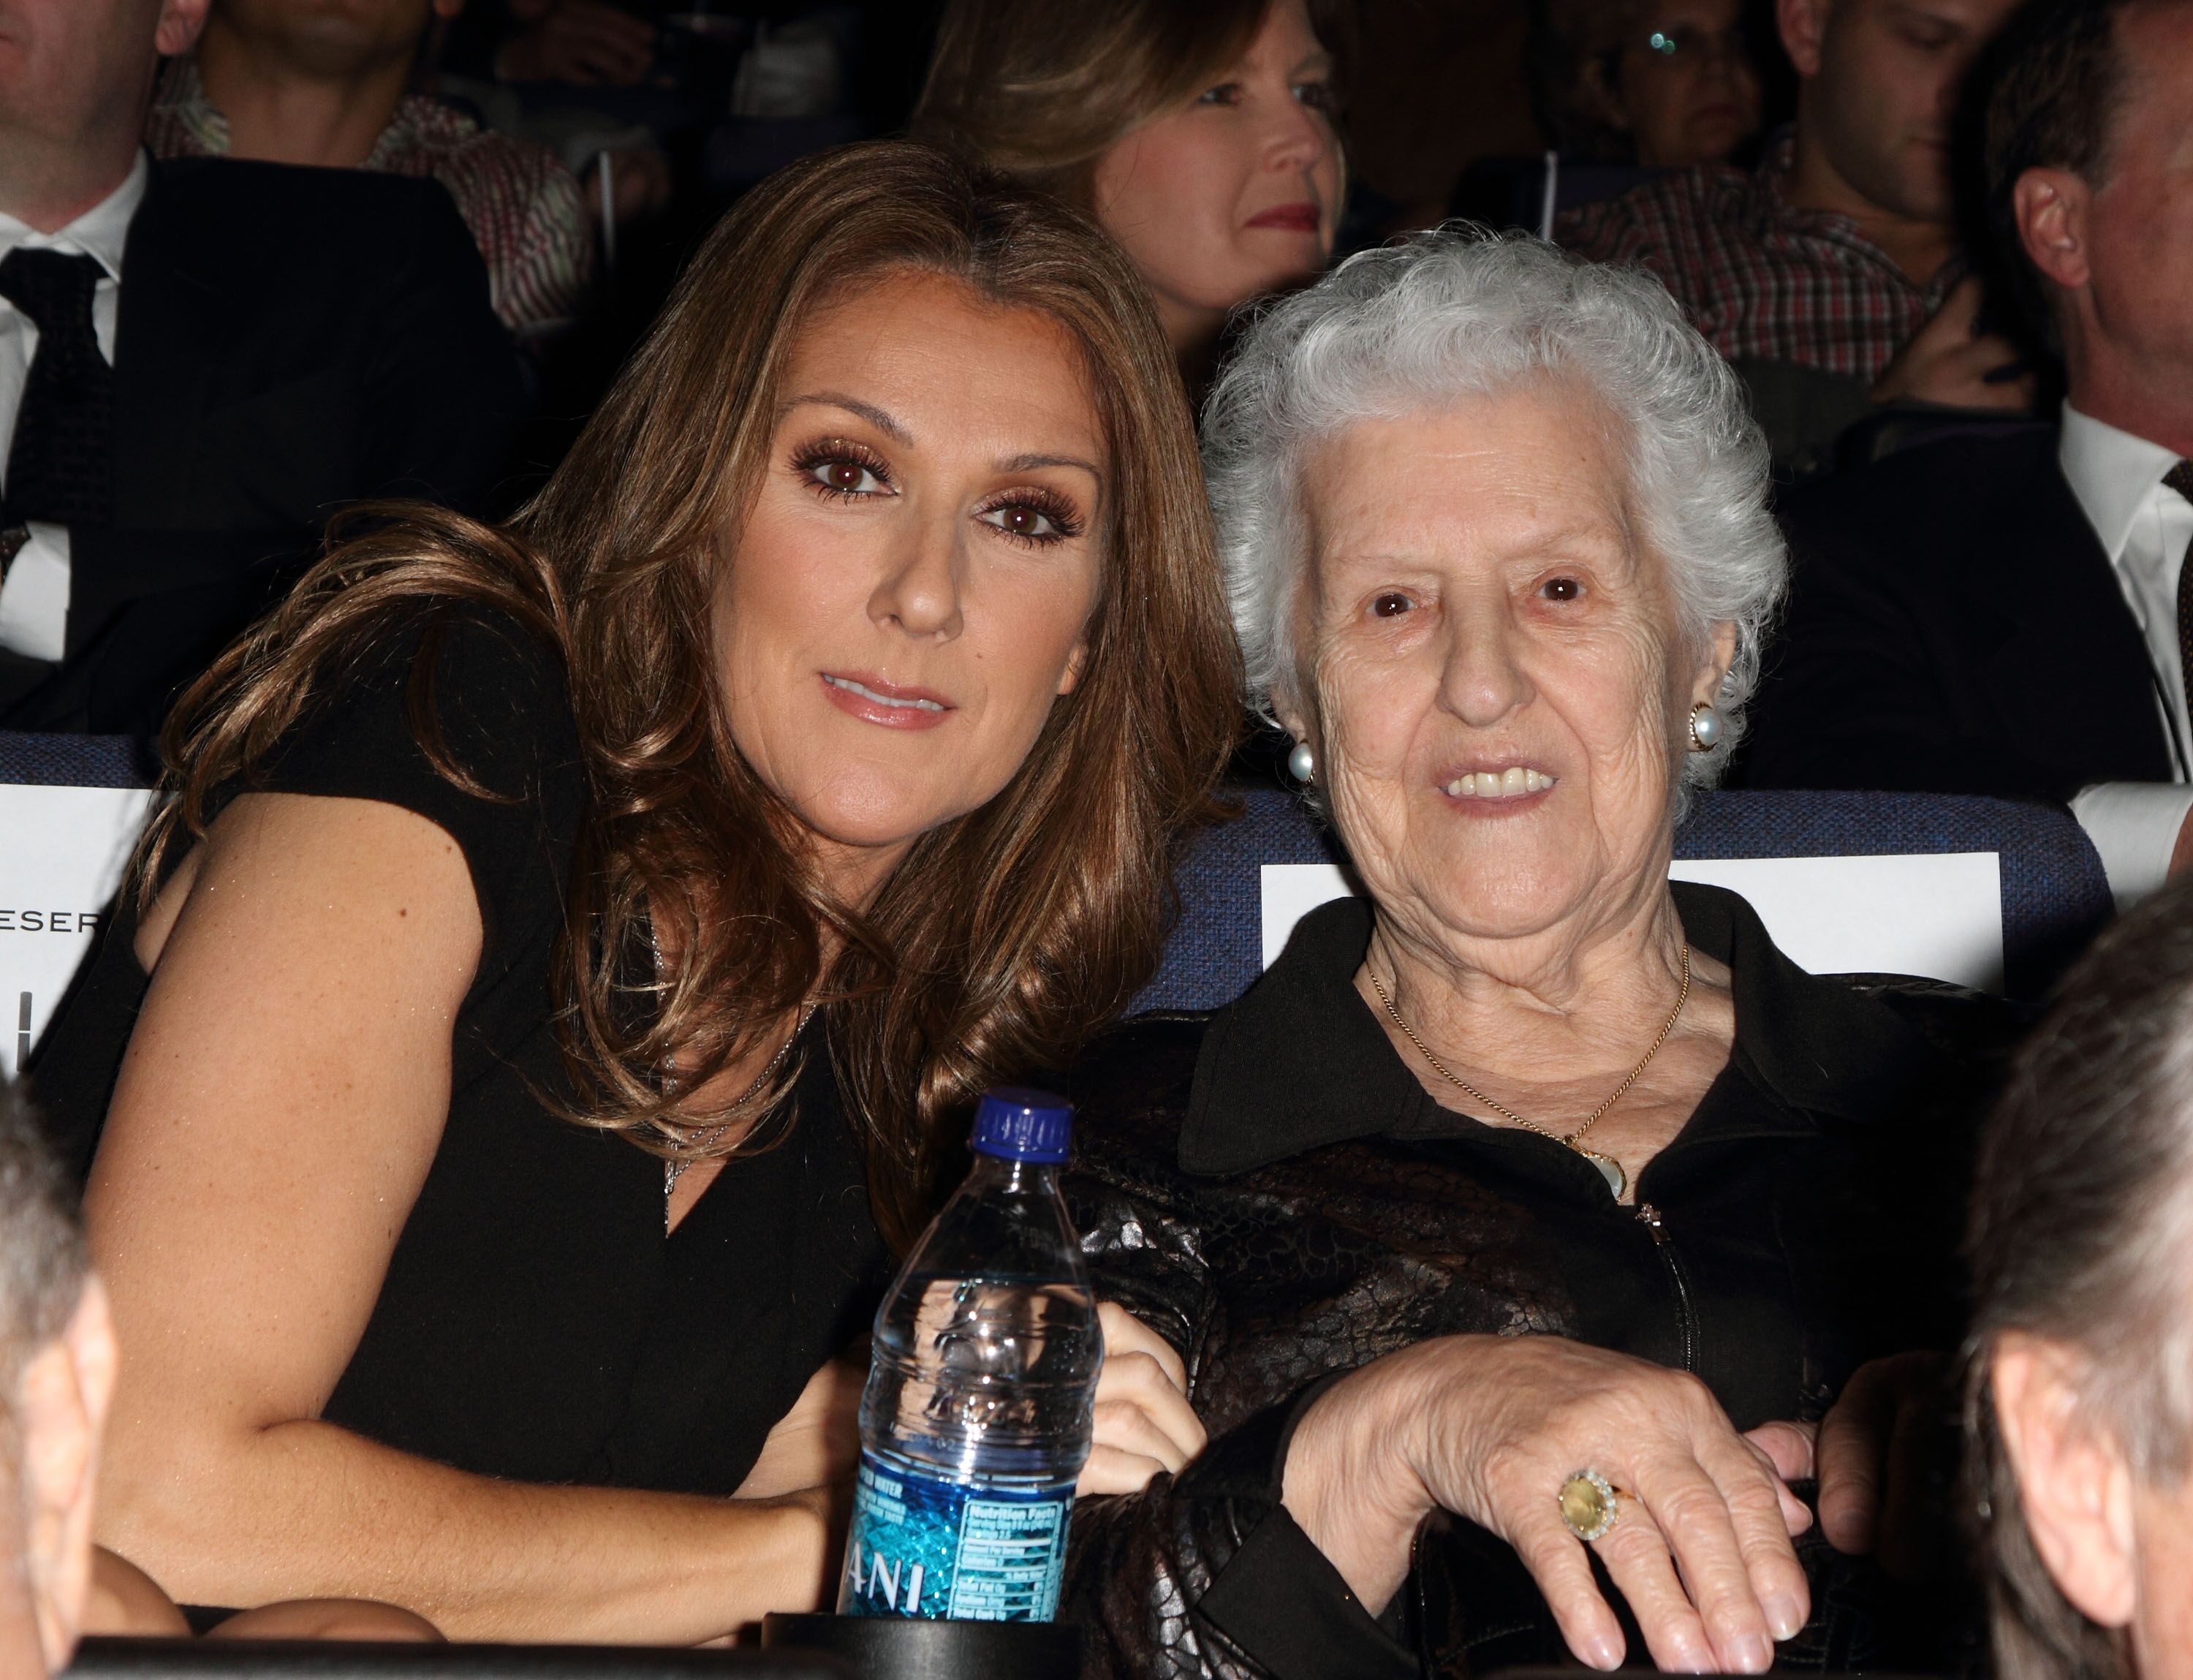 Celine Dion and Therese Tanguay Dion at the premiere of "Celine: Through The Eyes of The World" on February 16, 2010, in Miami Beach, Florida | Photo: Alexander Tamargo/Getty Images